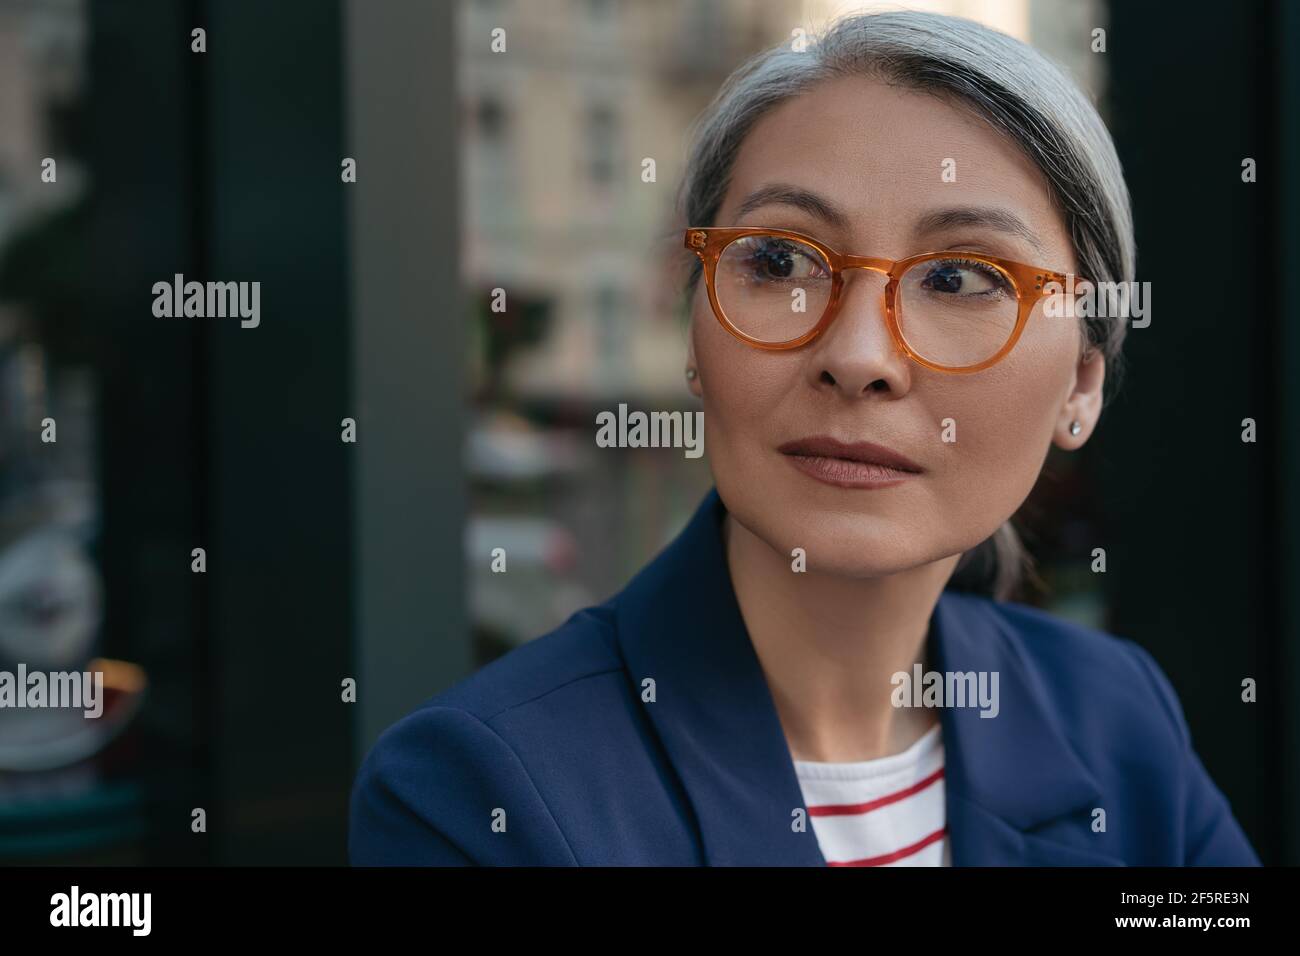 Close up portrait of pensive mature businesswoman looking away. Beautiful middle aged woman wearing eyeglasses standing outdoors. Vision concept Stock Photo